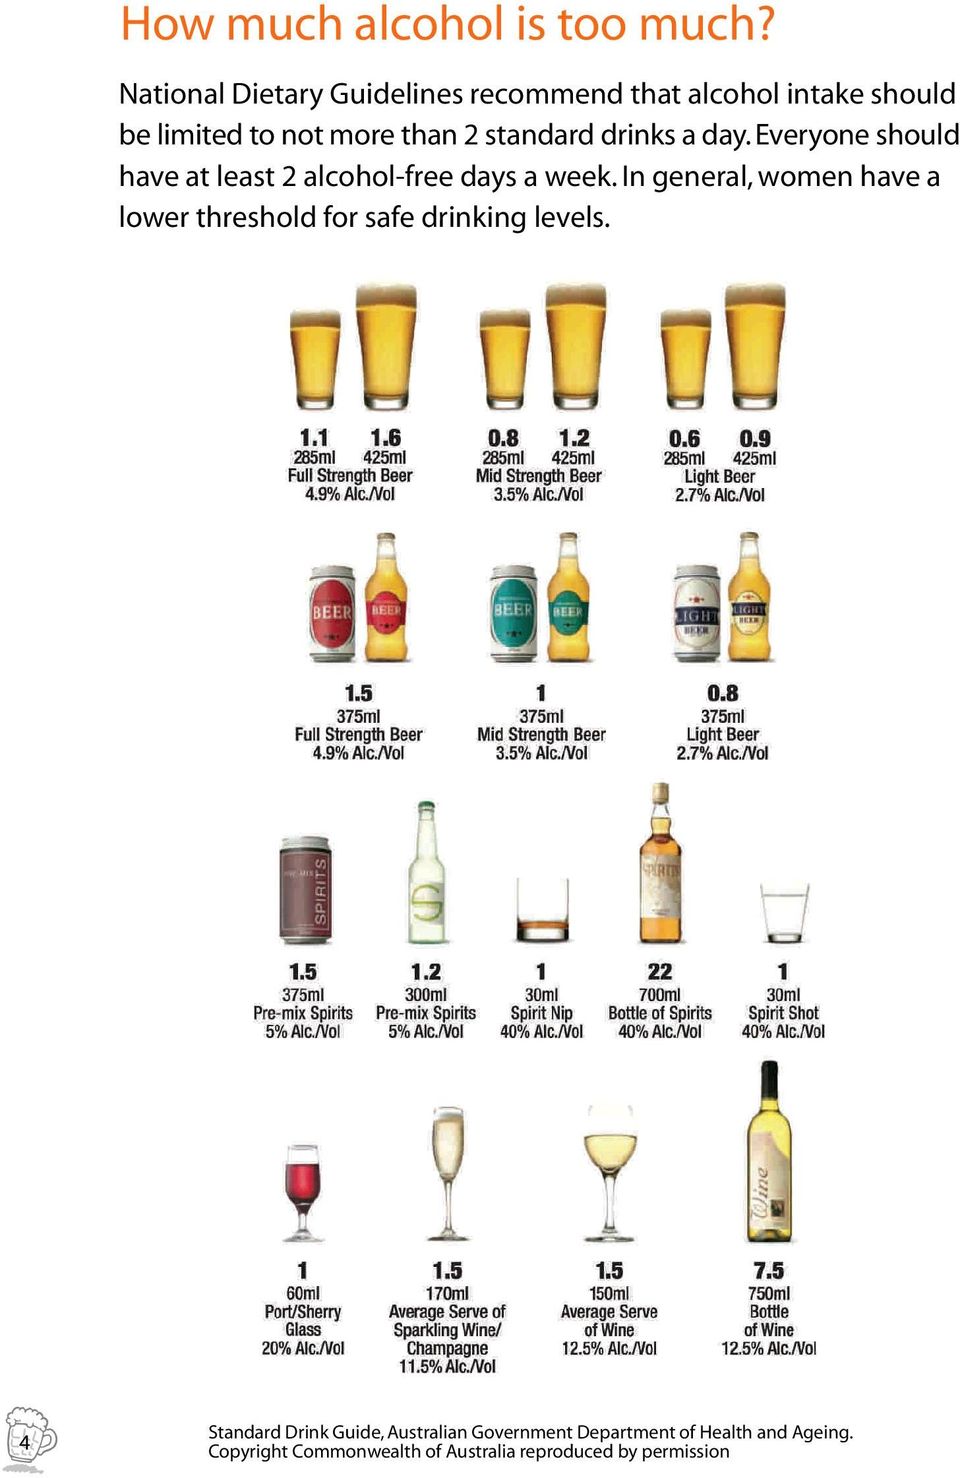 standard drinks a day. Everyone should have at least 2 alcohol-free days a week.